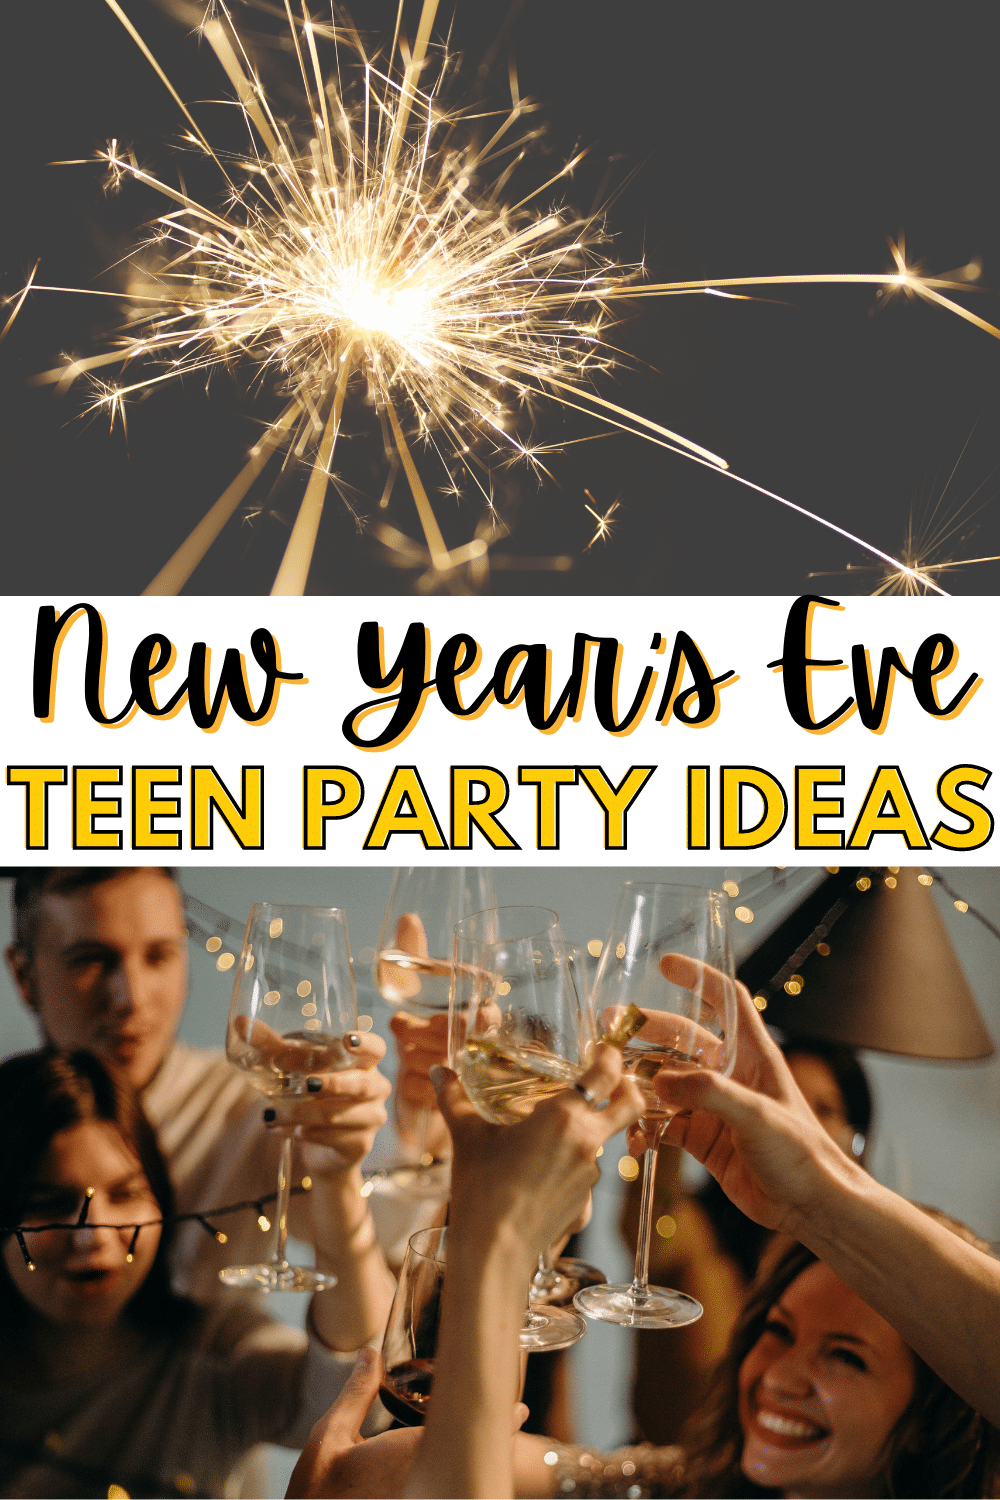 New Year’s Eve Party Ideas for Teens with a text title reading New Year's Eve teen party ideas